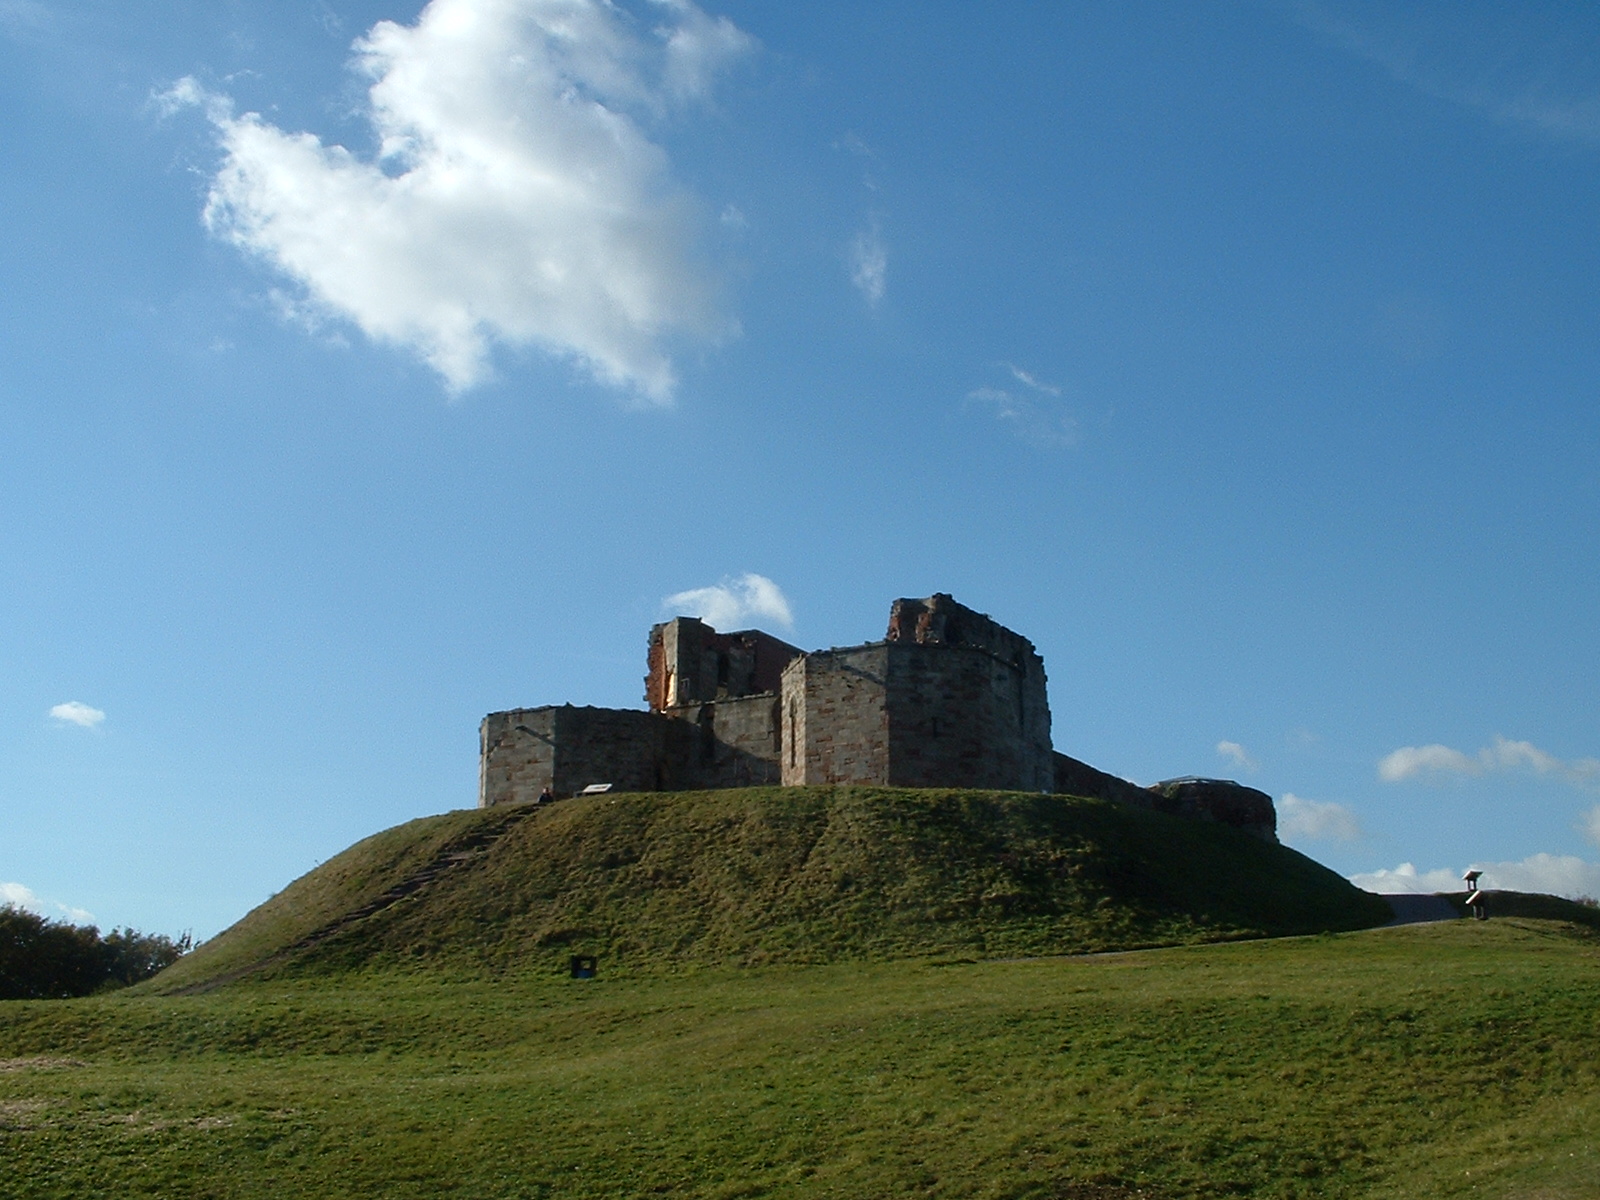 a large hill with a castle like structure on top of it